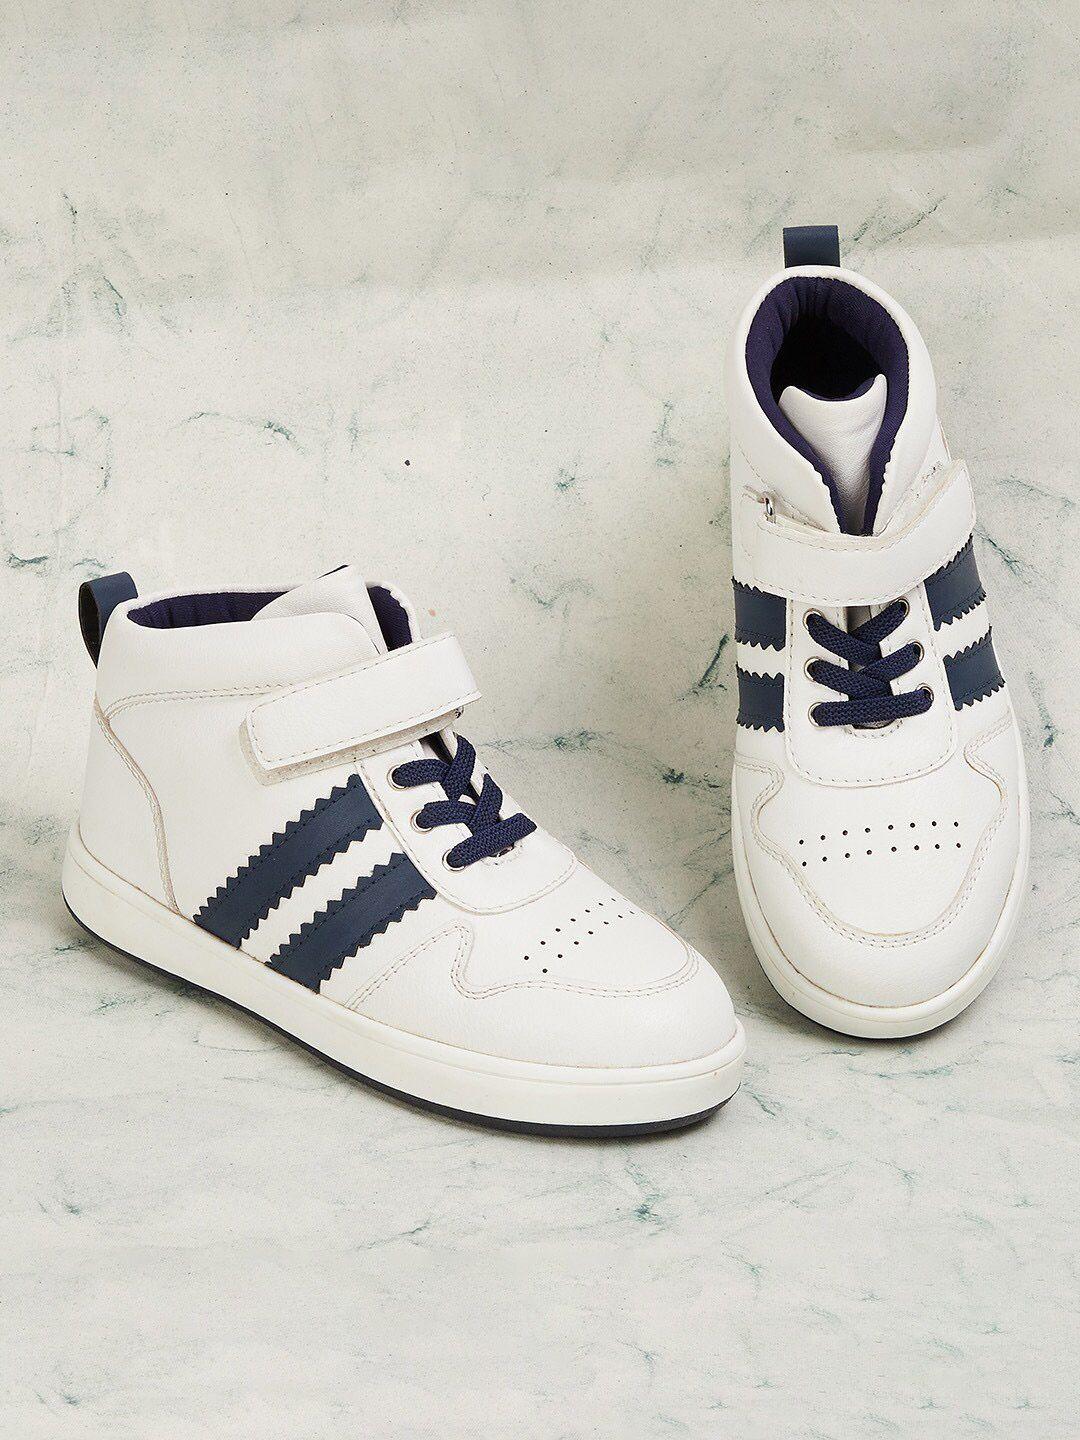 fame-forever-by-lifestyle-boys-colourblocked-high-top-sneakers